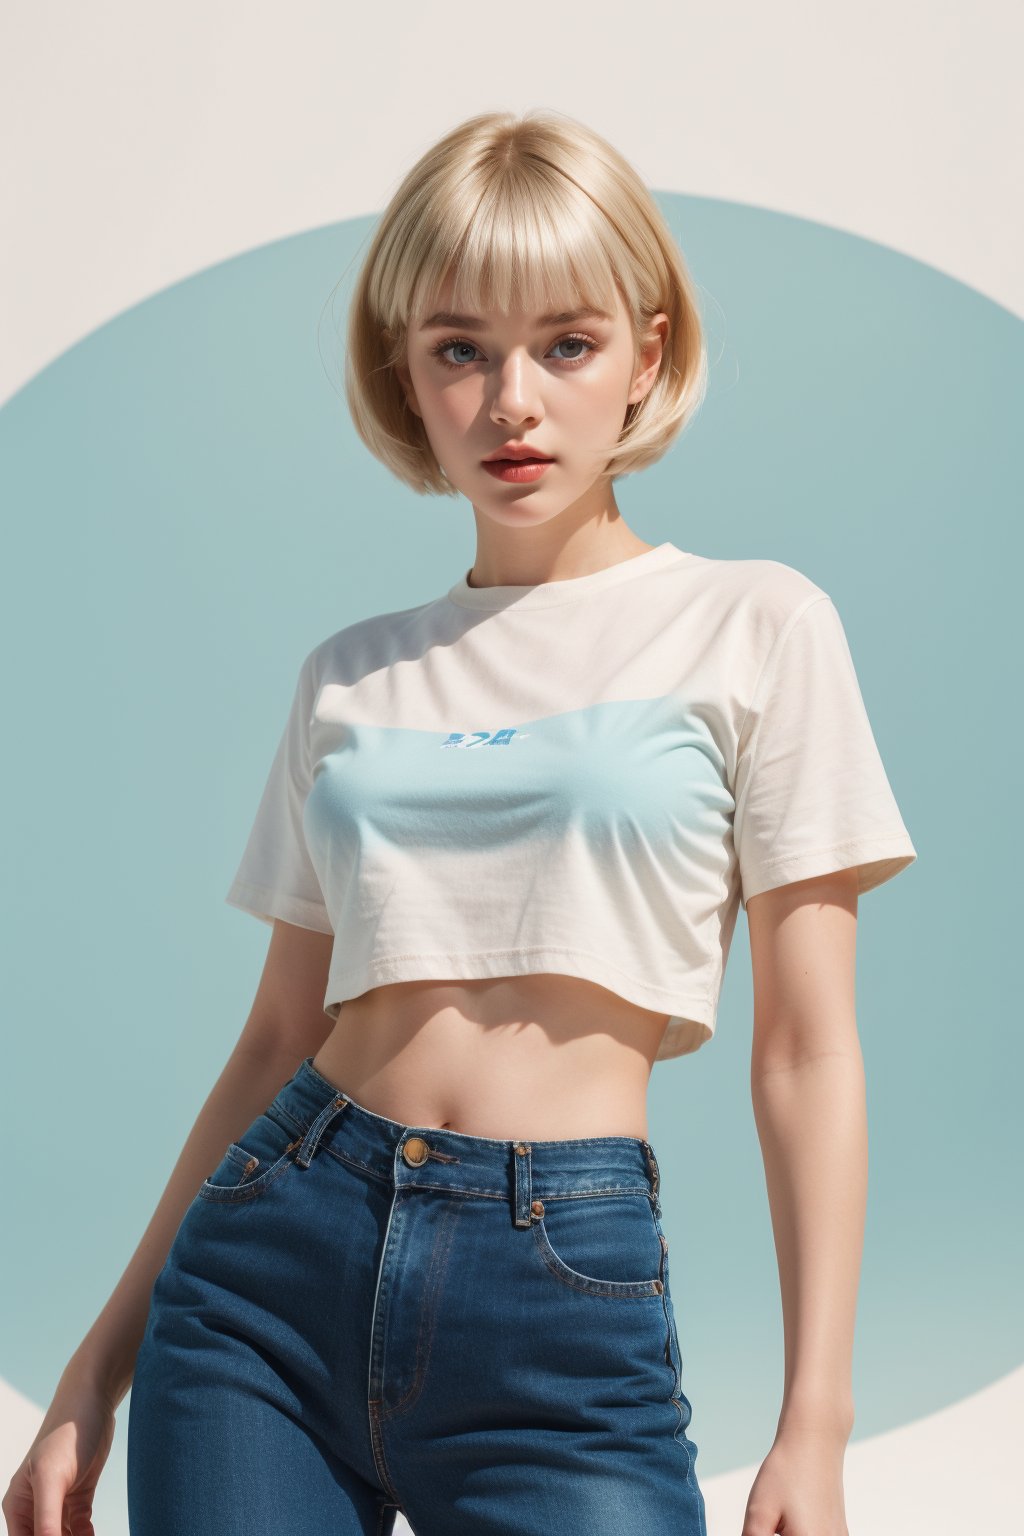 imagine Minimalist Y2K portrait of a girl with bubbly white haircut using Hasselblad camera on white backdrop, by photographer Juergen Teller, retro young Korean idol with short bouncy platinum mushroom cut, wearing cropped baby tee and low-rise distressed jeans from 90s/2000s era, holding vintage Hasselblad film camera, shot on seamless white infinity curve backdrop, sharp contrasty lighting with subtle shadows, desaturated color palette with light baby blue accent, extremely fine details in hair strands and denim textures, 8K ultra high definition studio editorial style